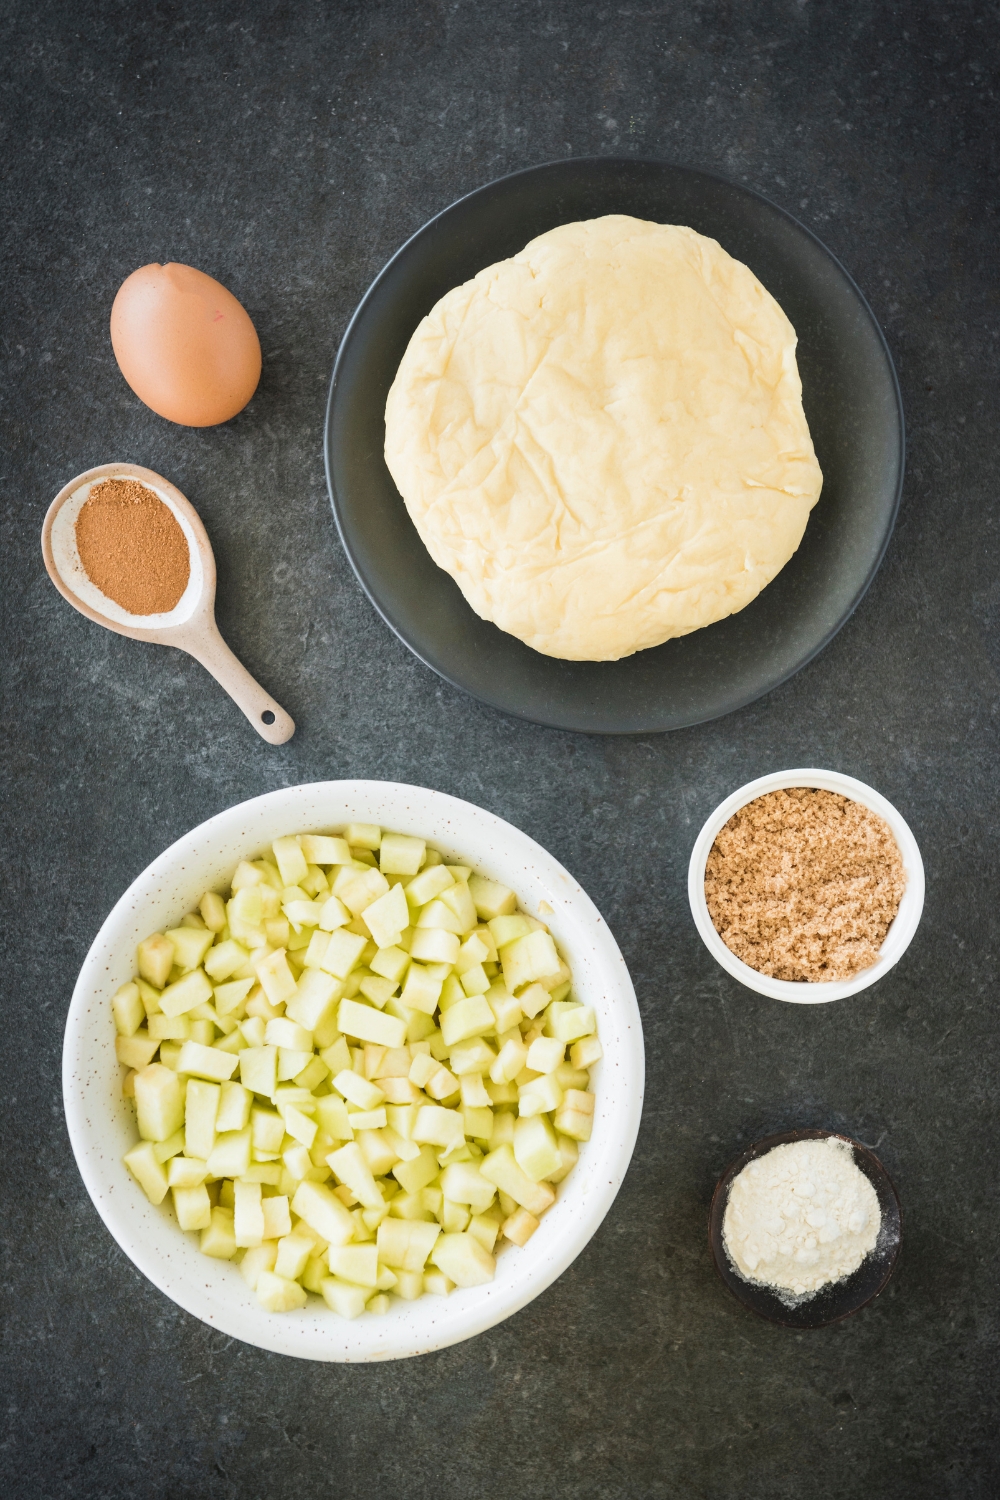 An assortment of ingredients including bowls of diced apples, pie dough, brown sugar, flour, a spoonful of cinnamon, and a single egg, all on a black countertop.